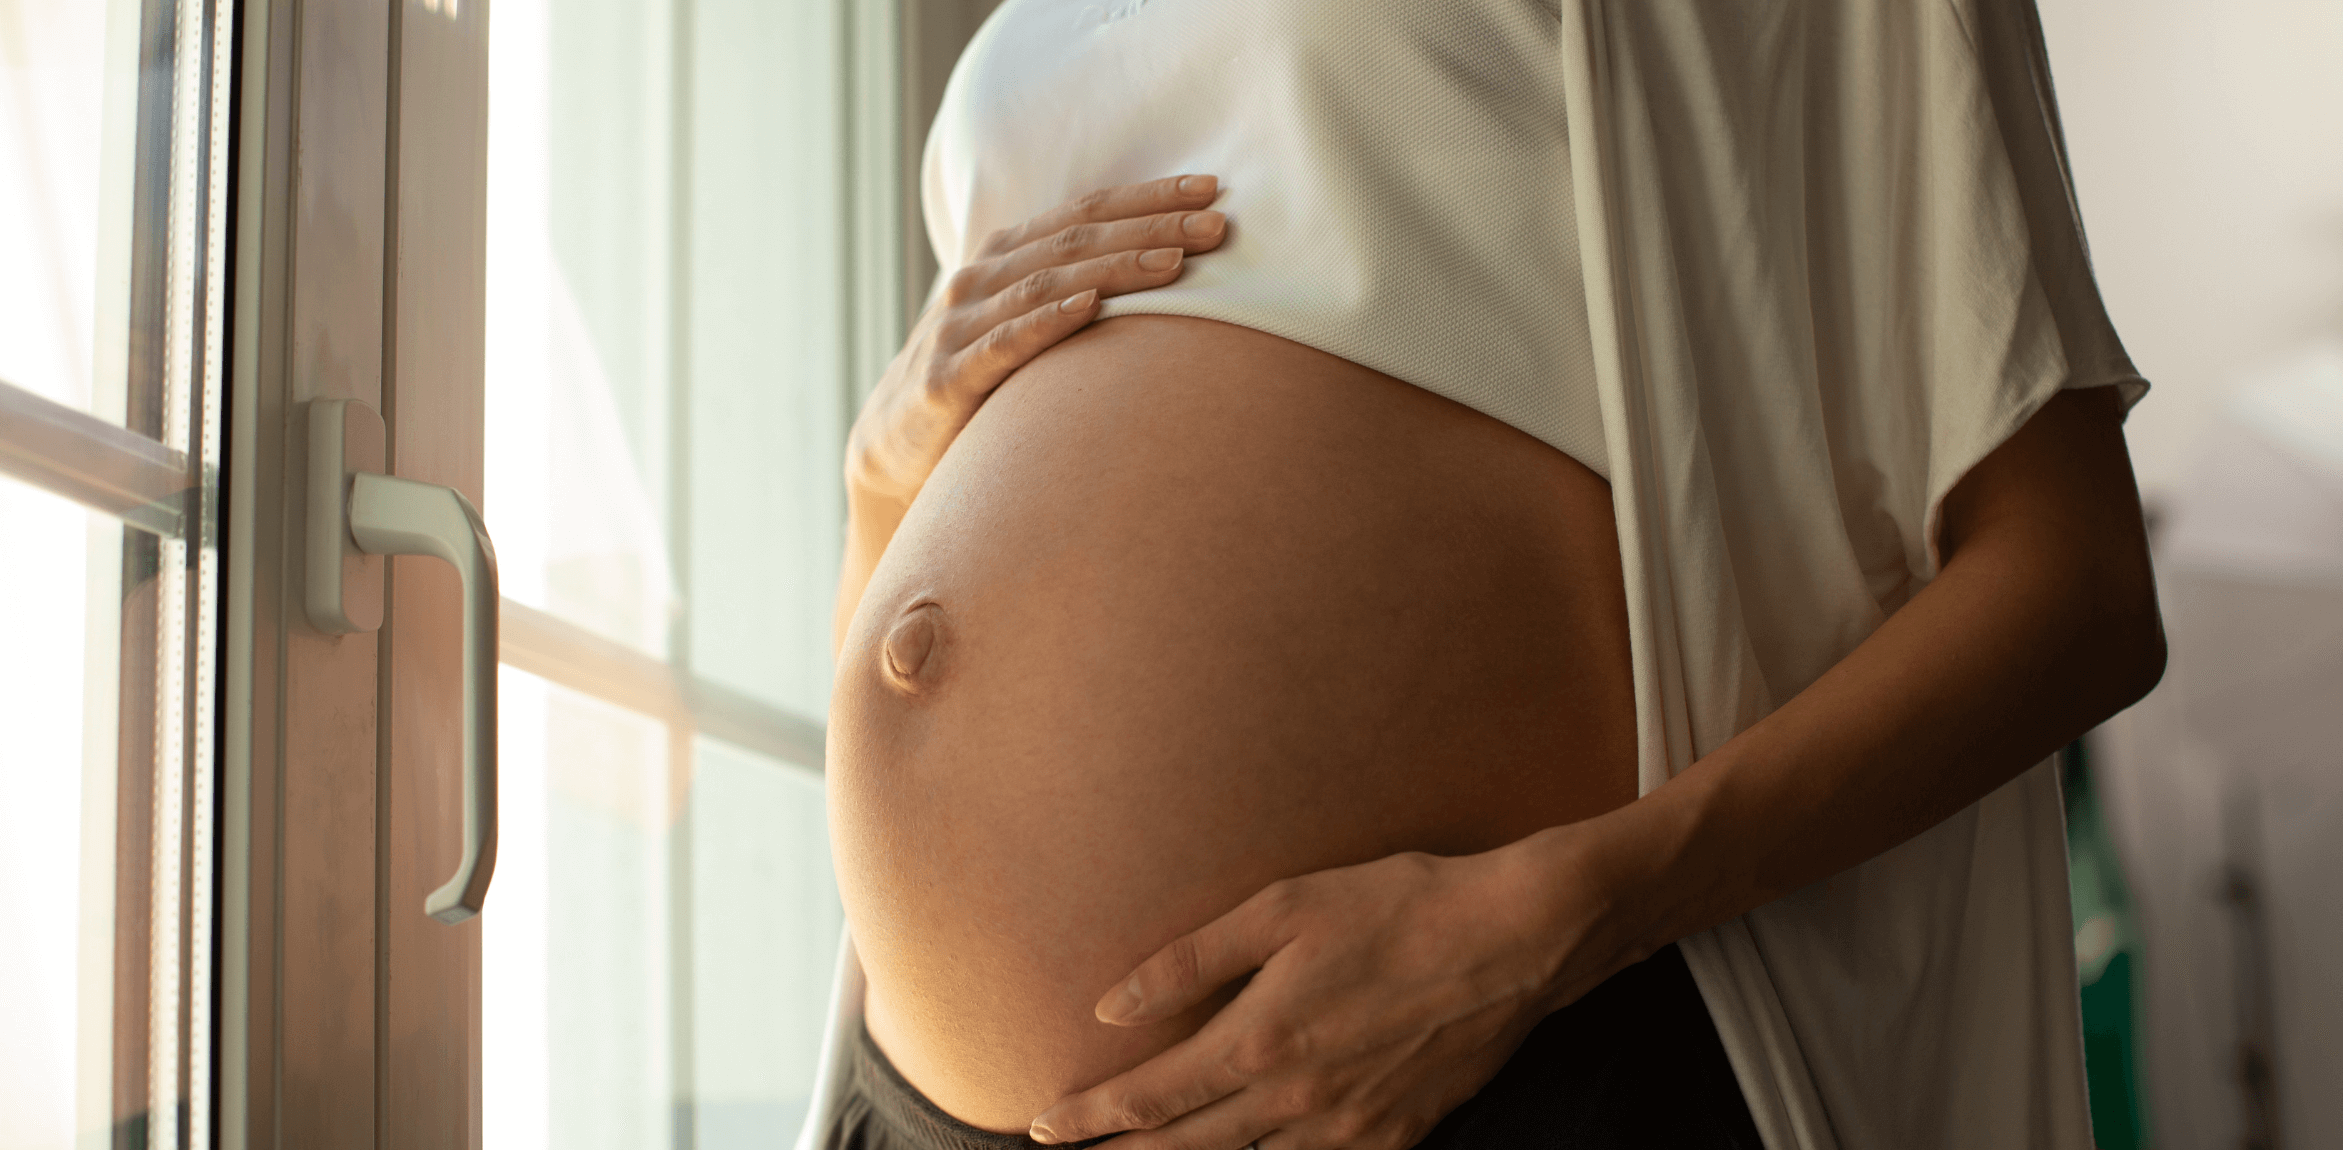 woman holding her bump near a window with image cut off so only her torso is in the frame